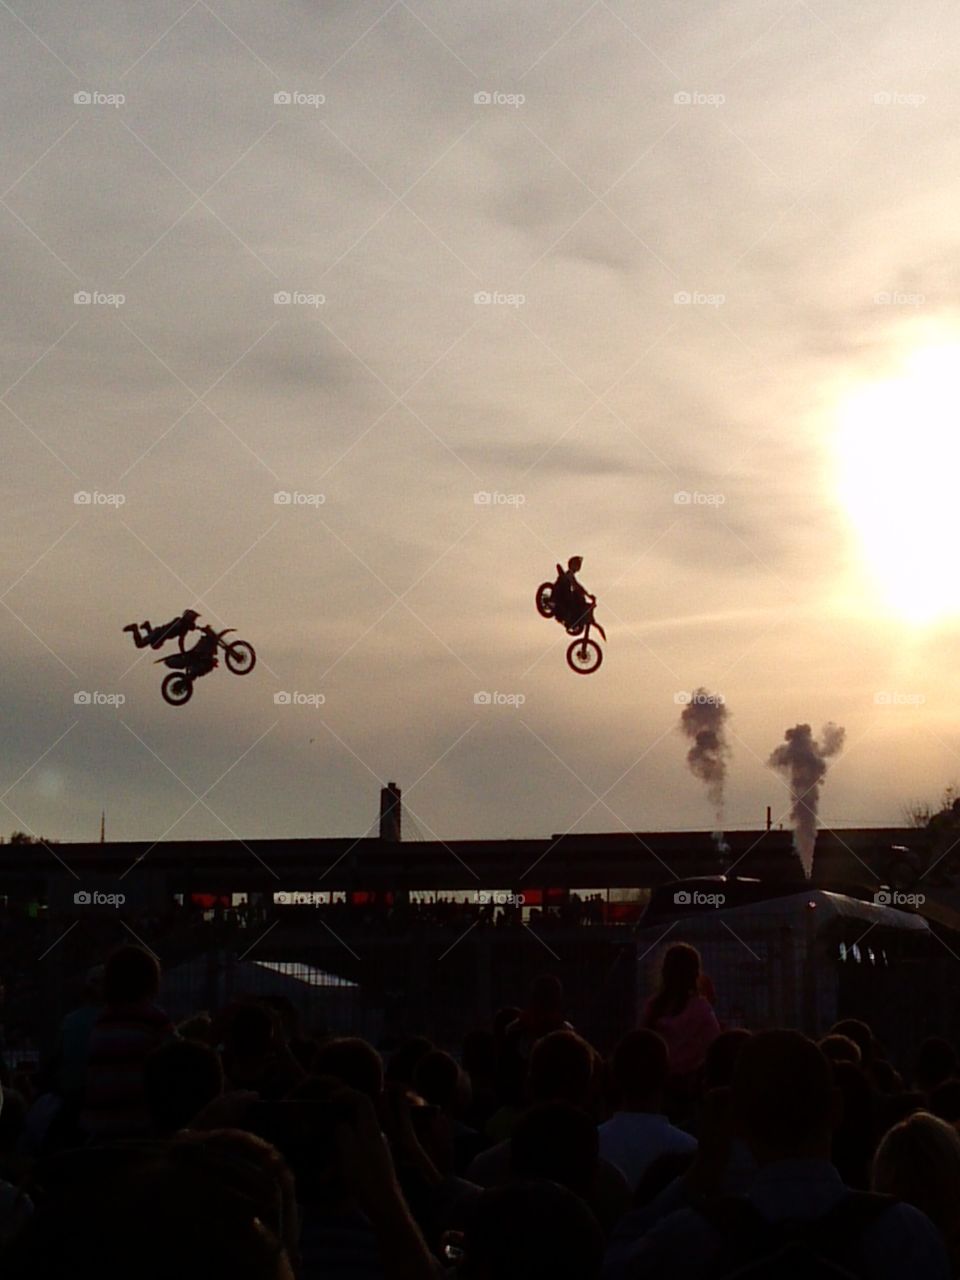 fmx now